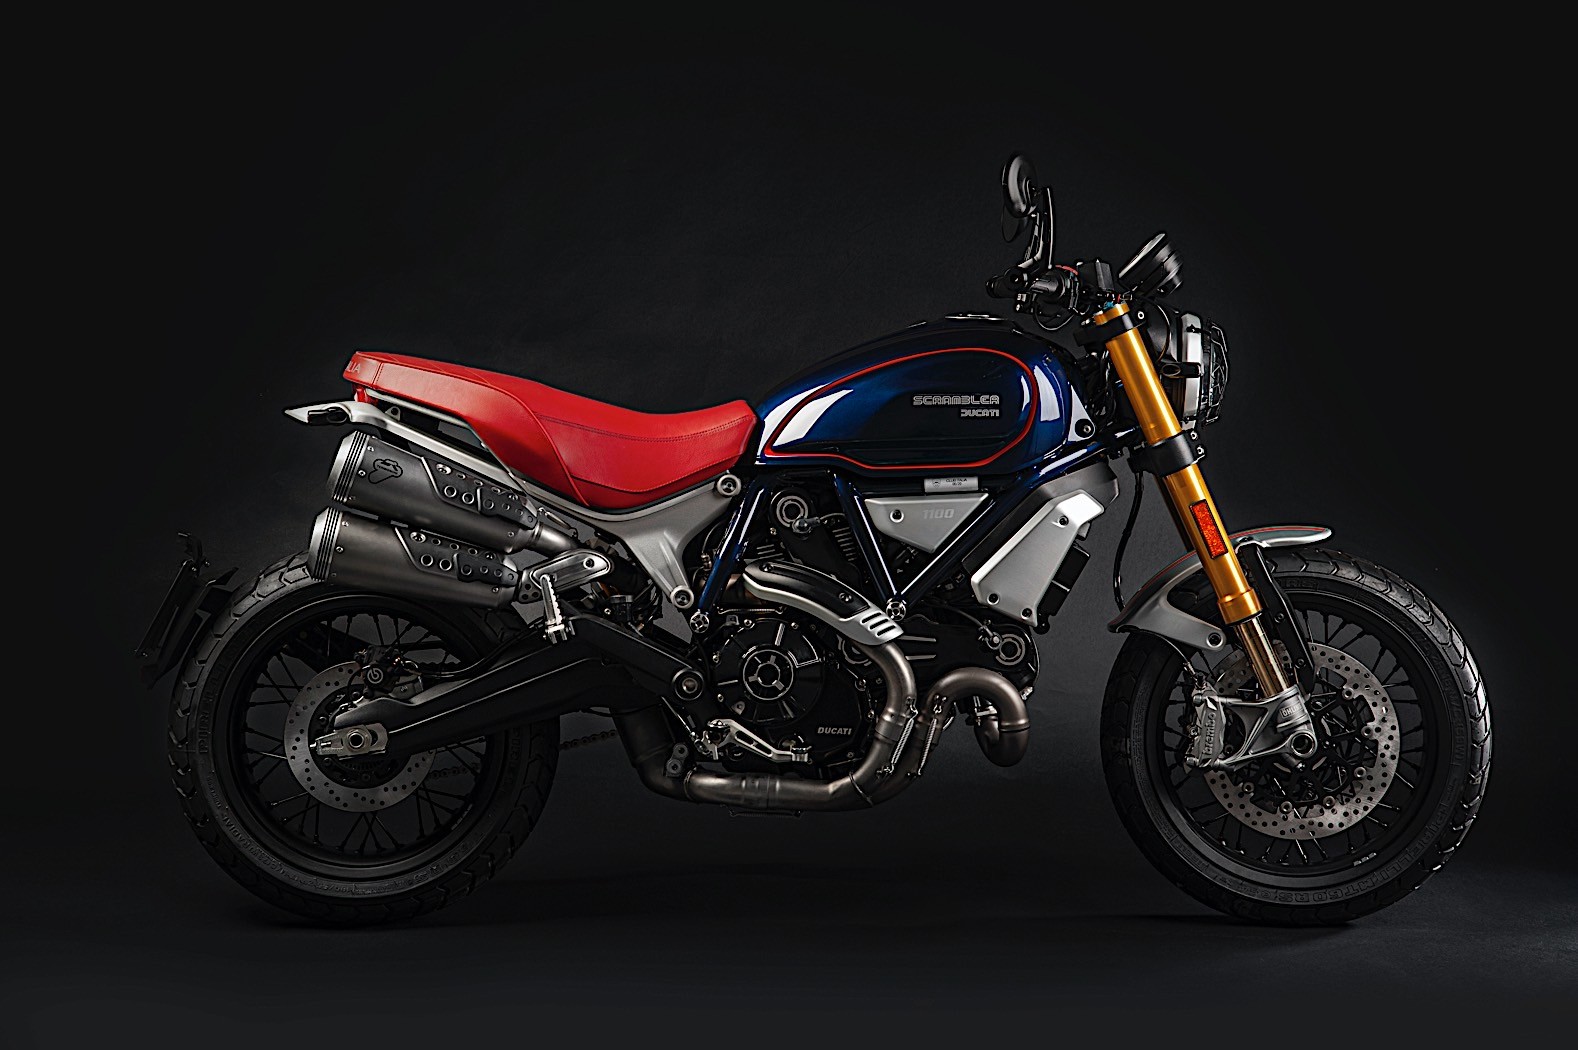 Most Exclusive Scrambler Ever Revealed as the Ducati 1100 Sport Pro ...